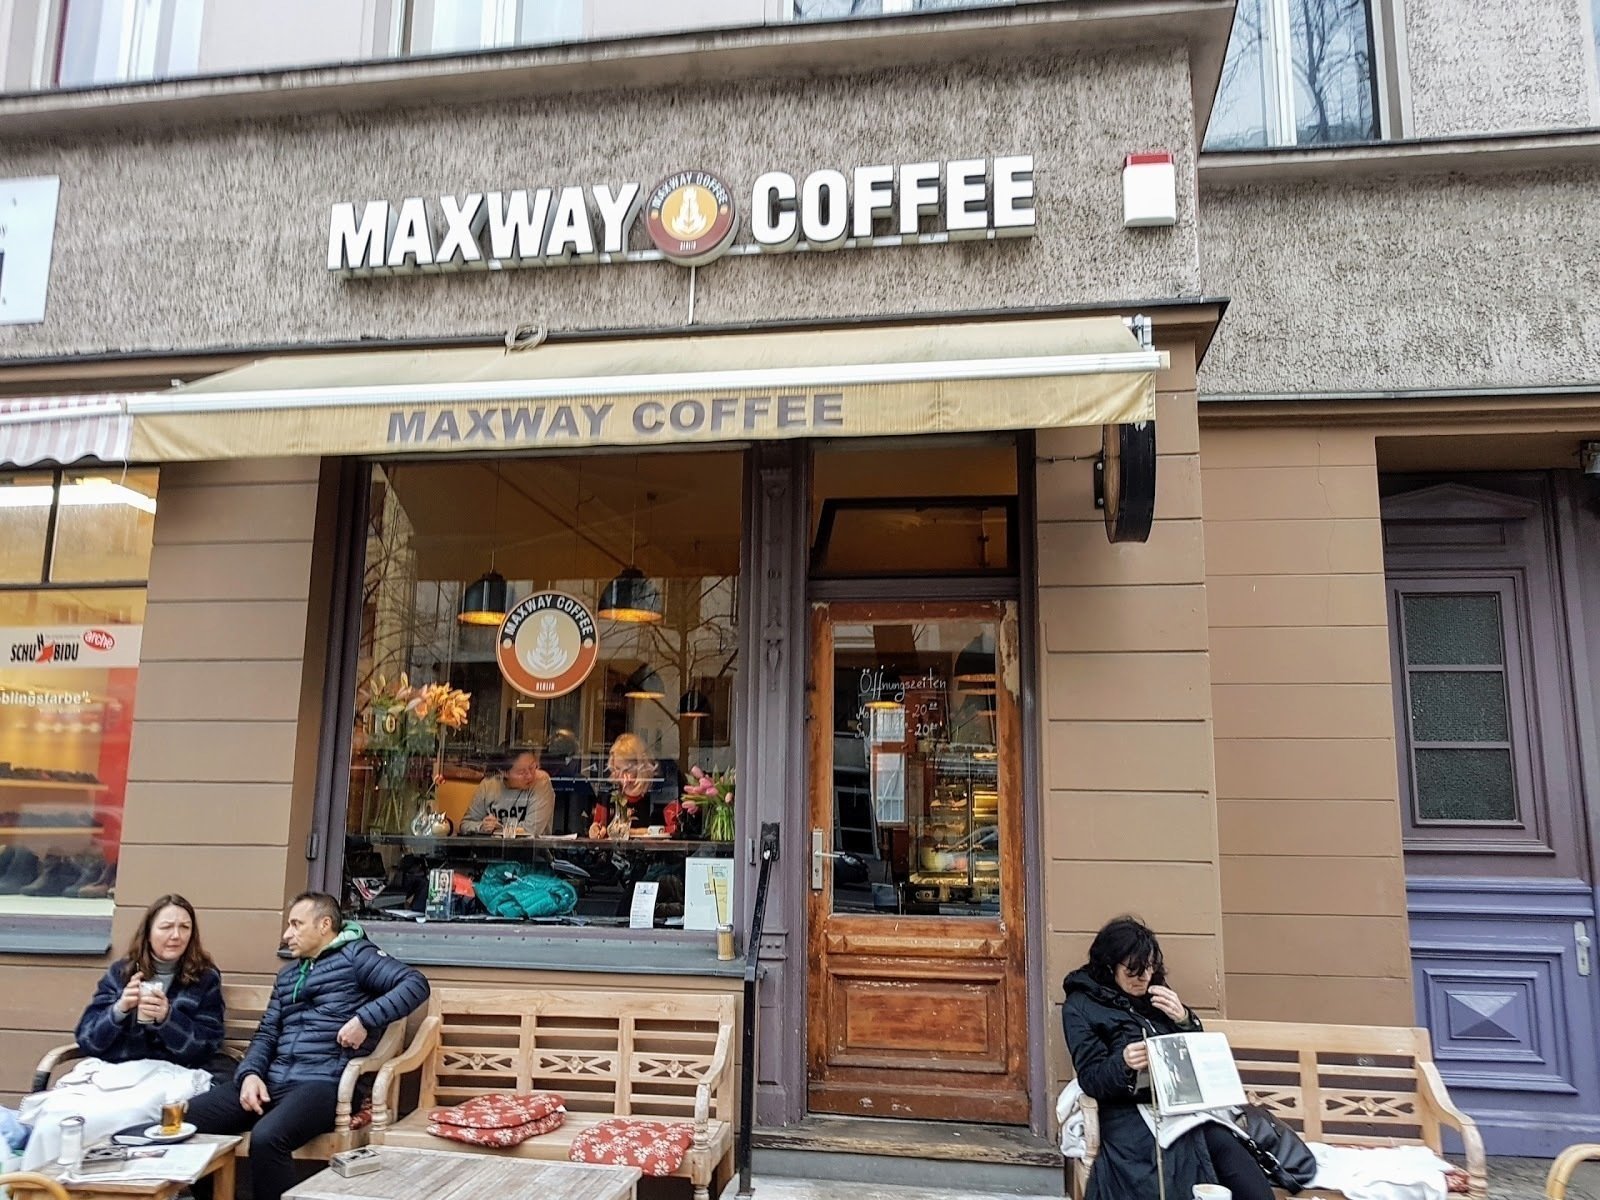 <span class="translation_missing" title="translation missing: en.meta.location_title, location_name: Maxway Coffee, city: Berlin">Location Title</span>